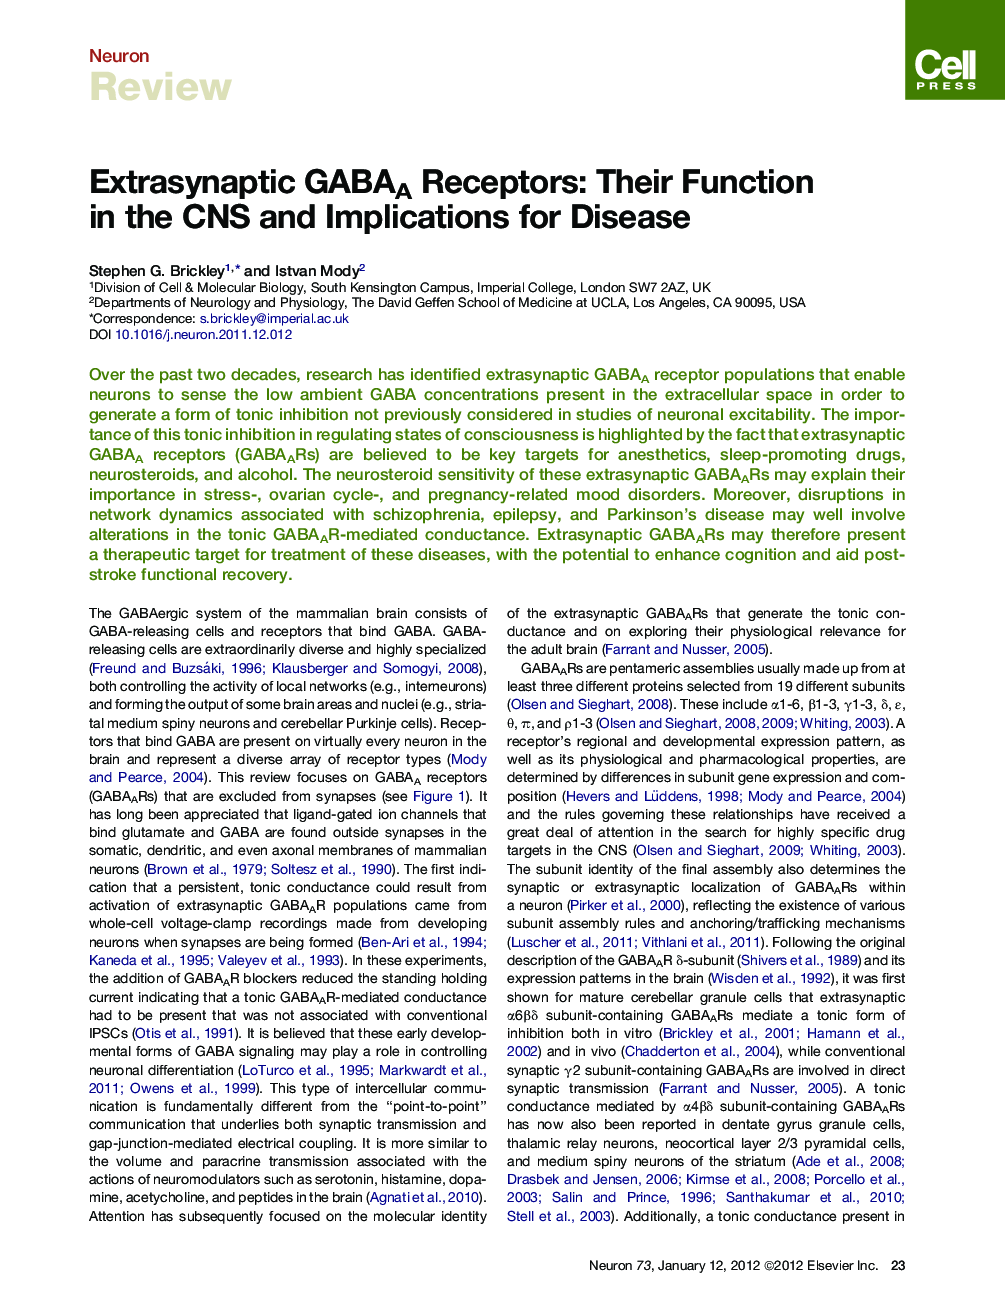 Extrasynaptic GABAA Receptors: Their Function in the CNS and Implications for Disease